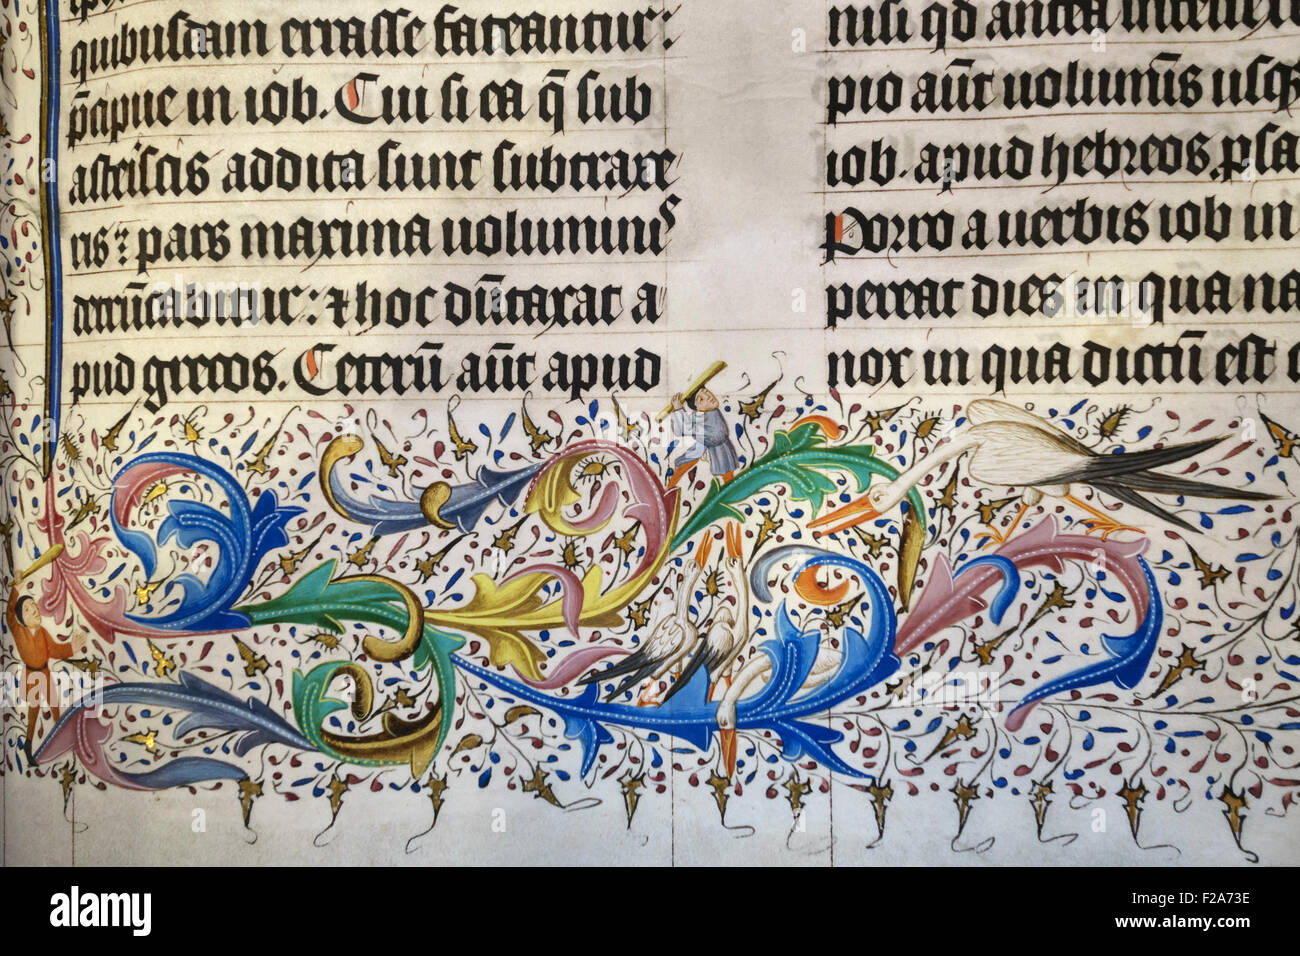 Malmesbury Abbey, Wiltshire, UK. Detail from a four volume illuminated Latin Bible made in 1407, showing a man hunting wildfowl Stock Photo